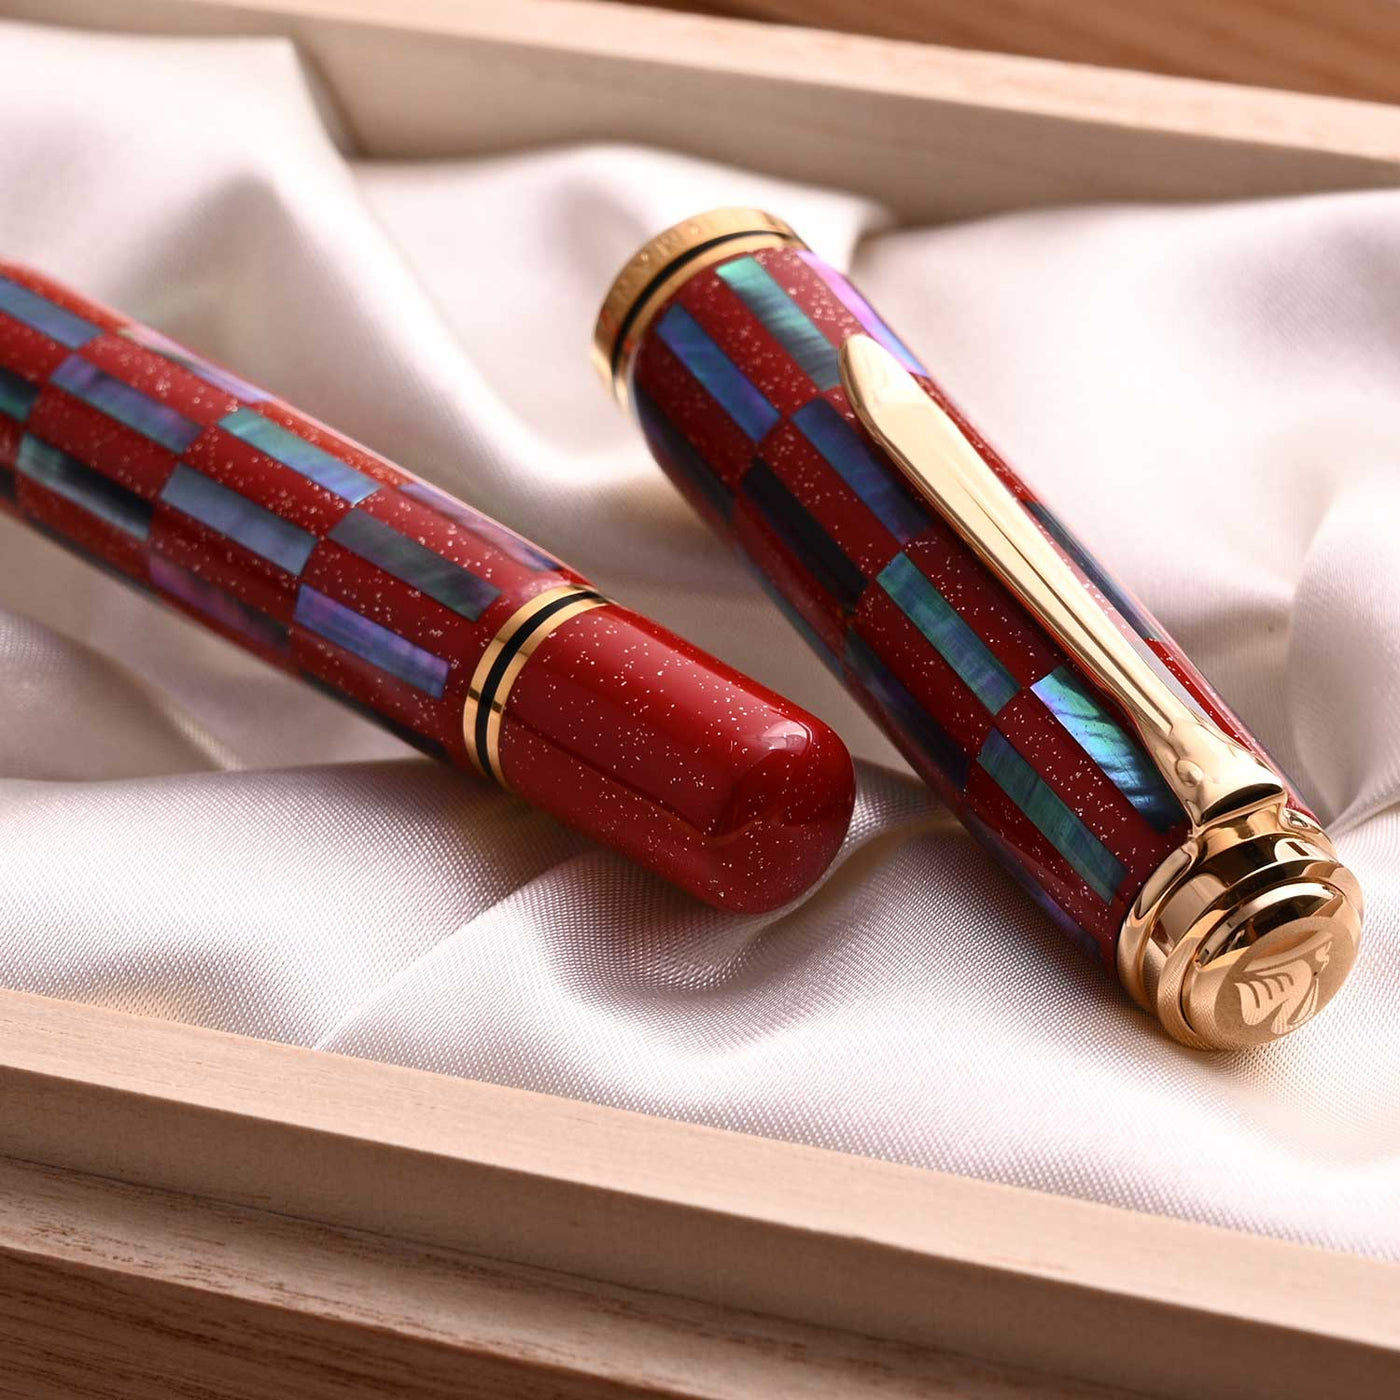 Pelikan M1000 Fountain Pen - Raden Red Infinity (Limited Edition)